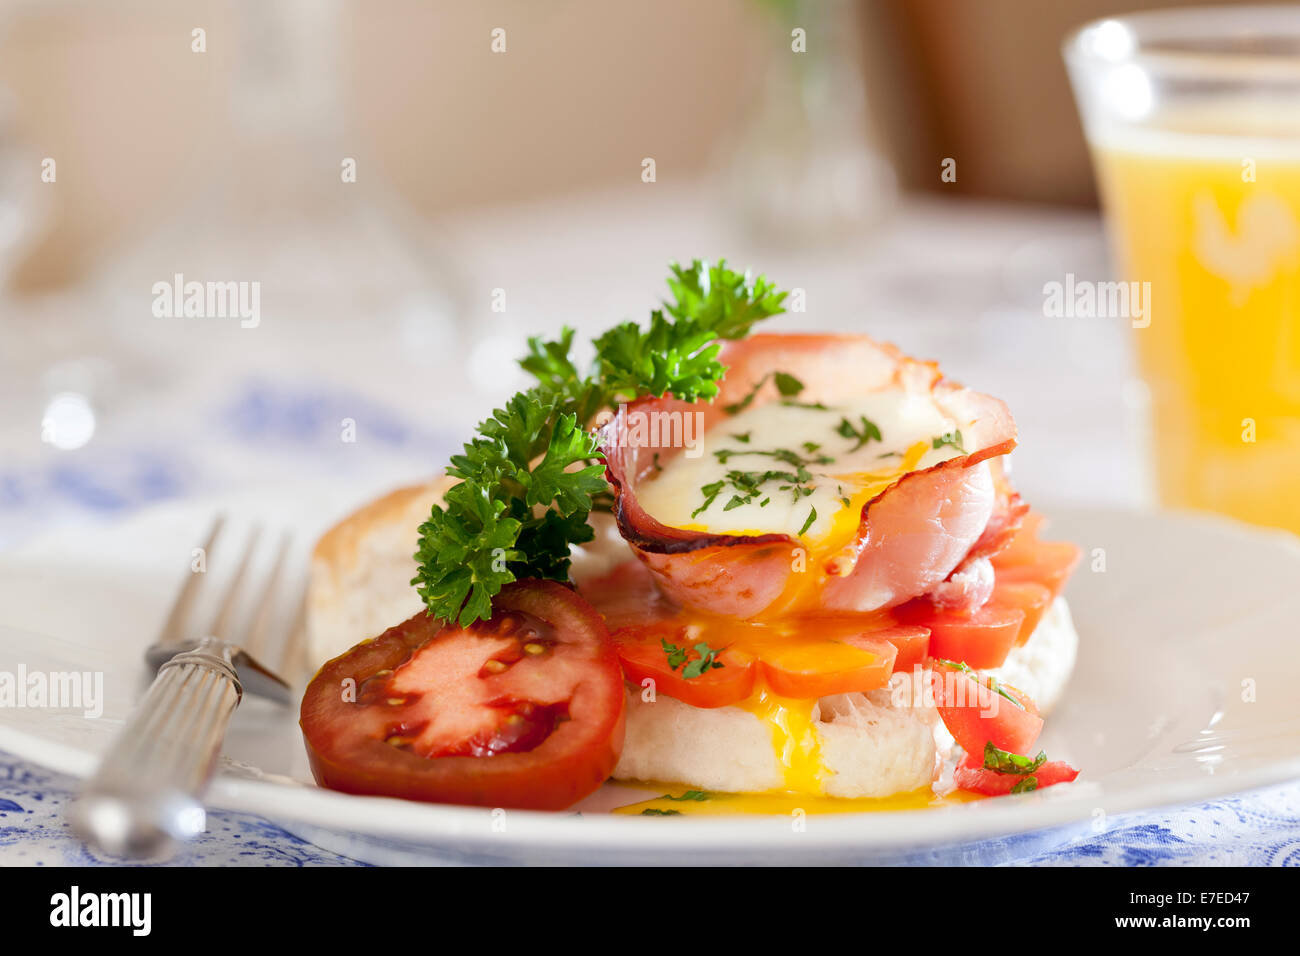 Breakfast of Eggs baked in ham served with tomatoes and herbs Stock Photo